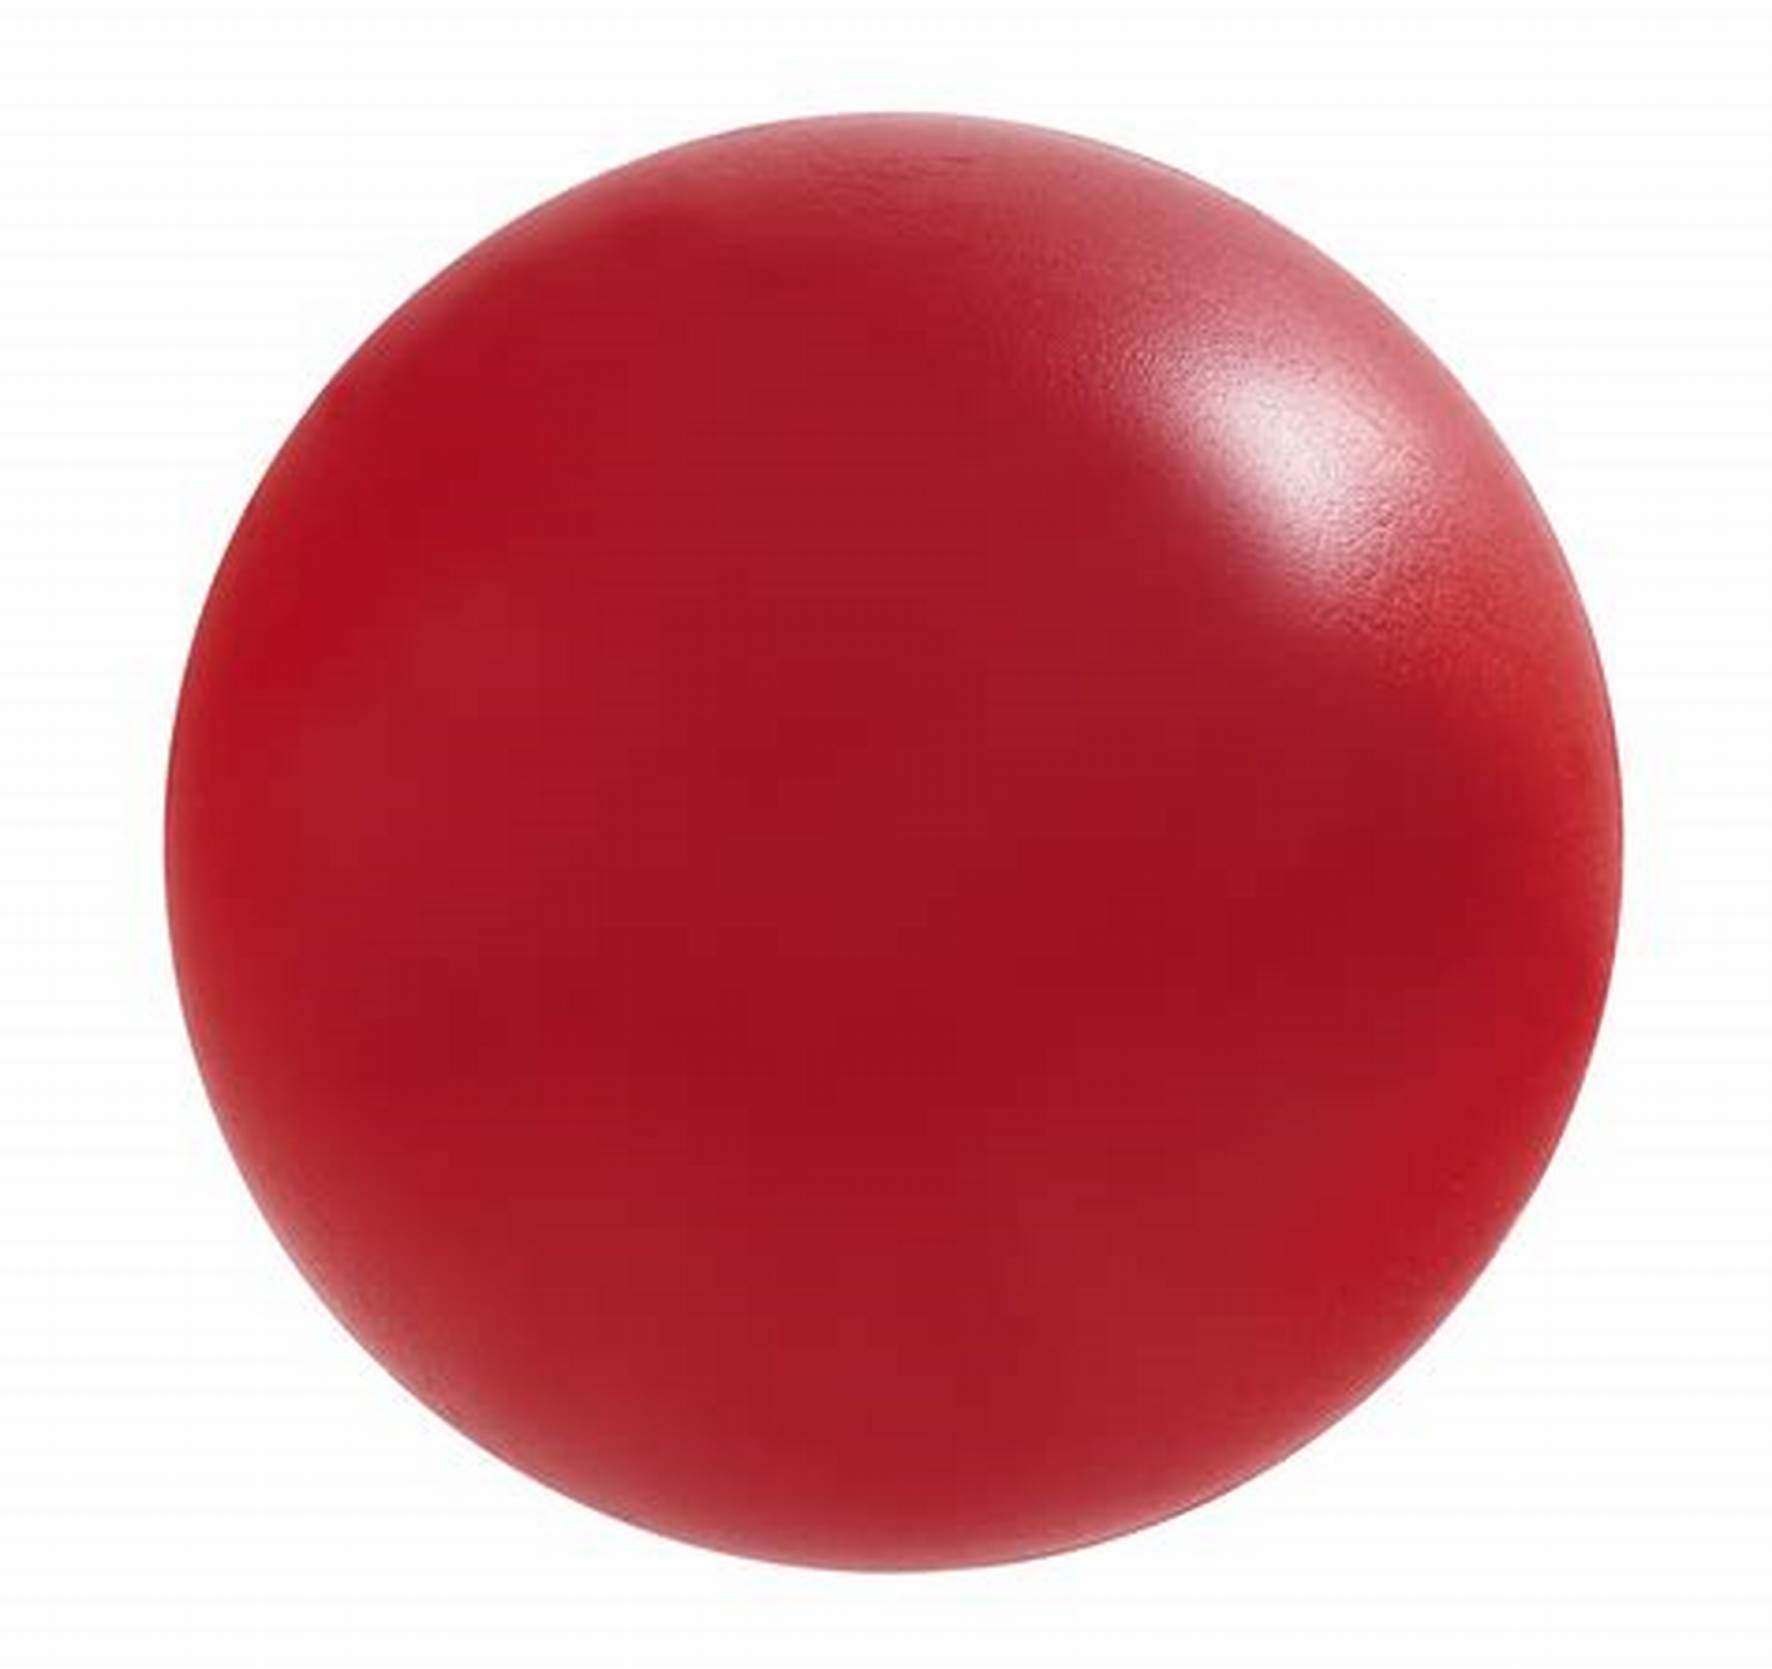  Red hard Ball Toy s 